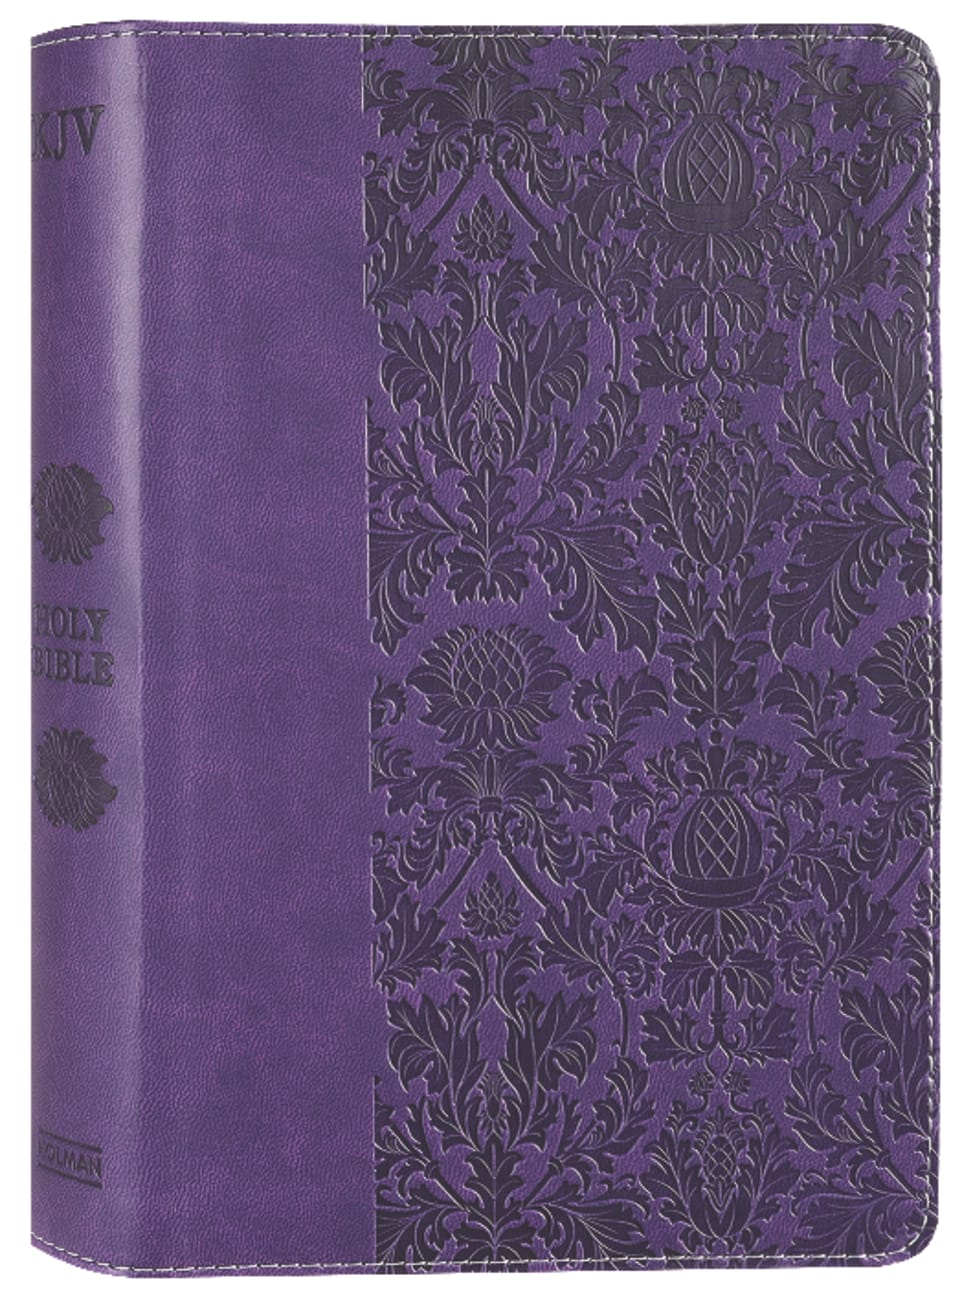 KJV Holy Bible Large Print Personal Size Reference Bible Purple (Red Letter Edition) Premium Imitation Leather